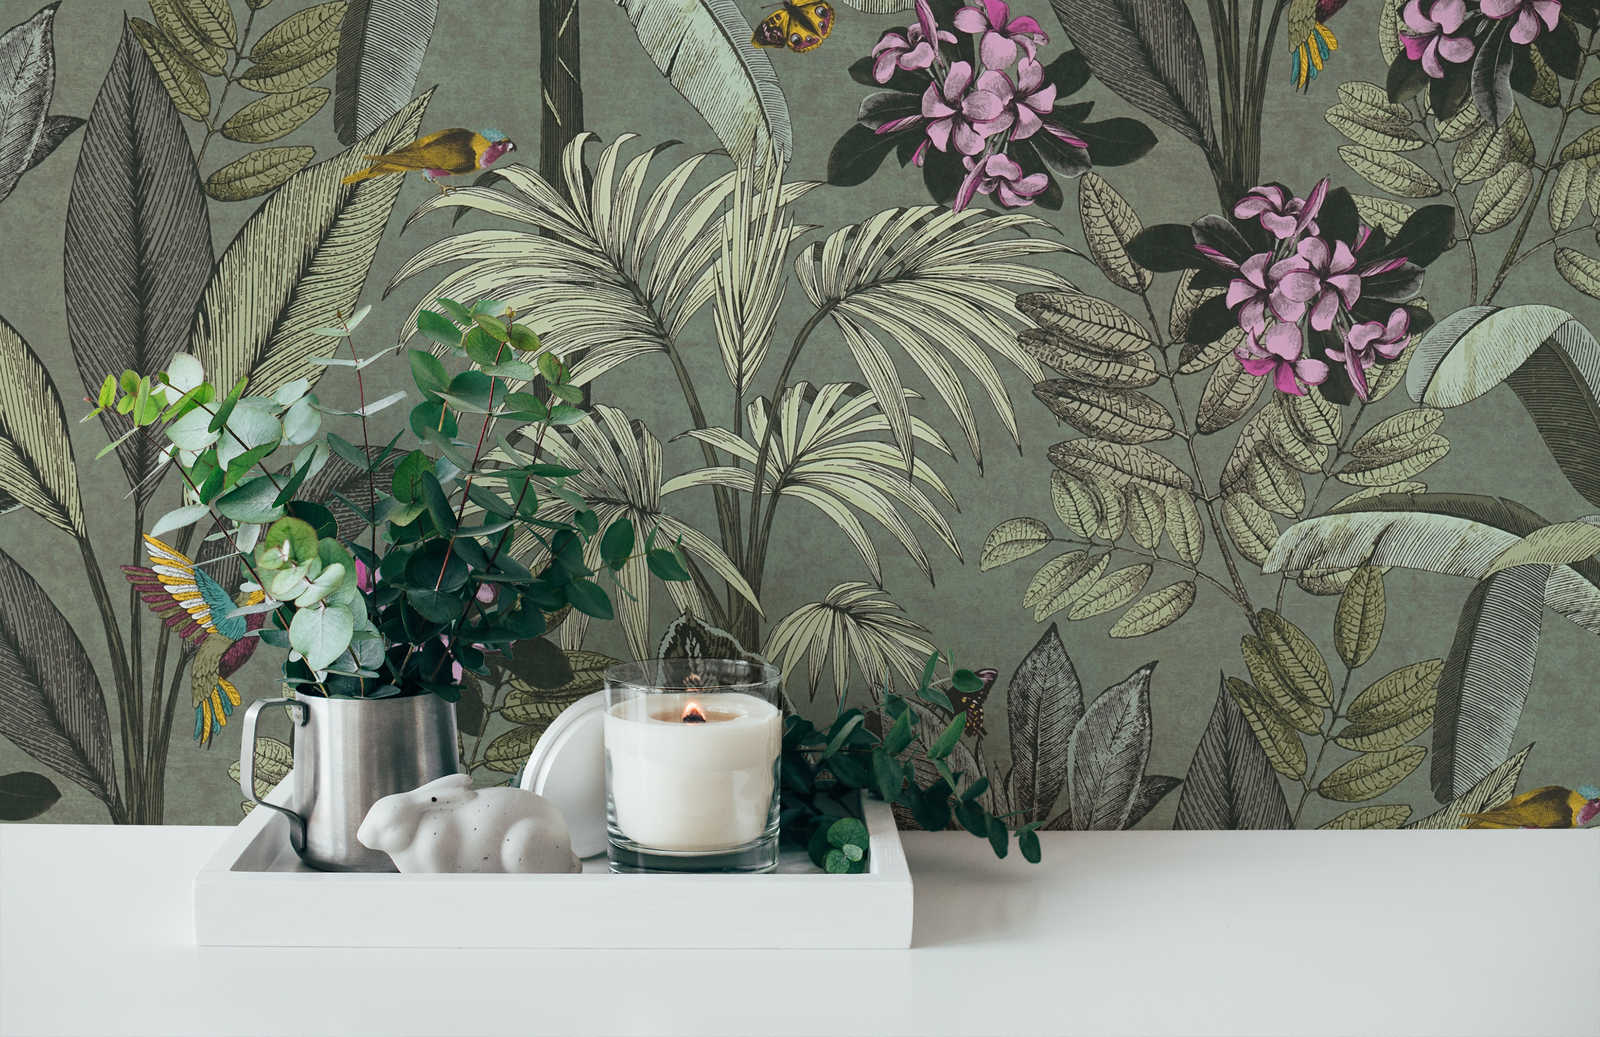             Jungle wallpaper leaves, flowers and birds - grey, green
        